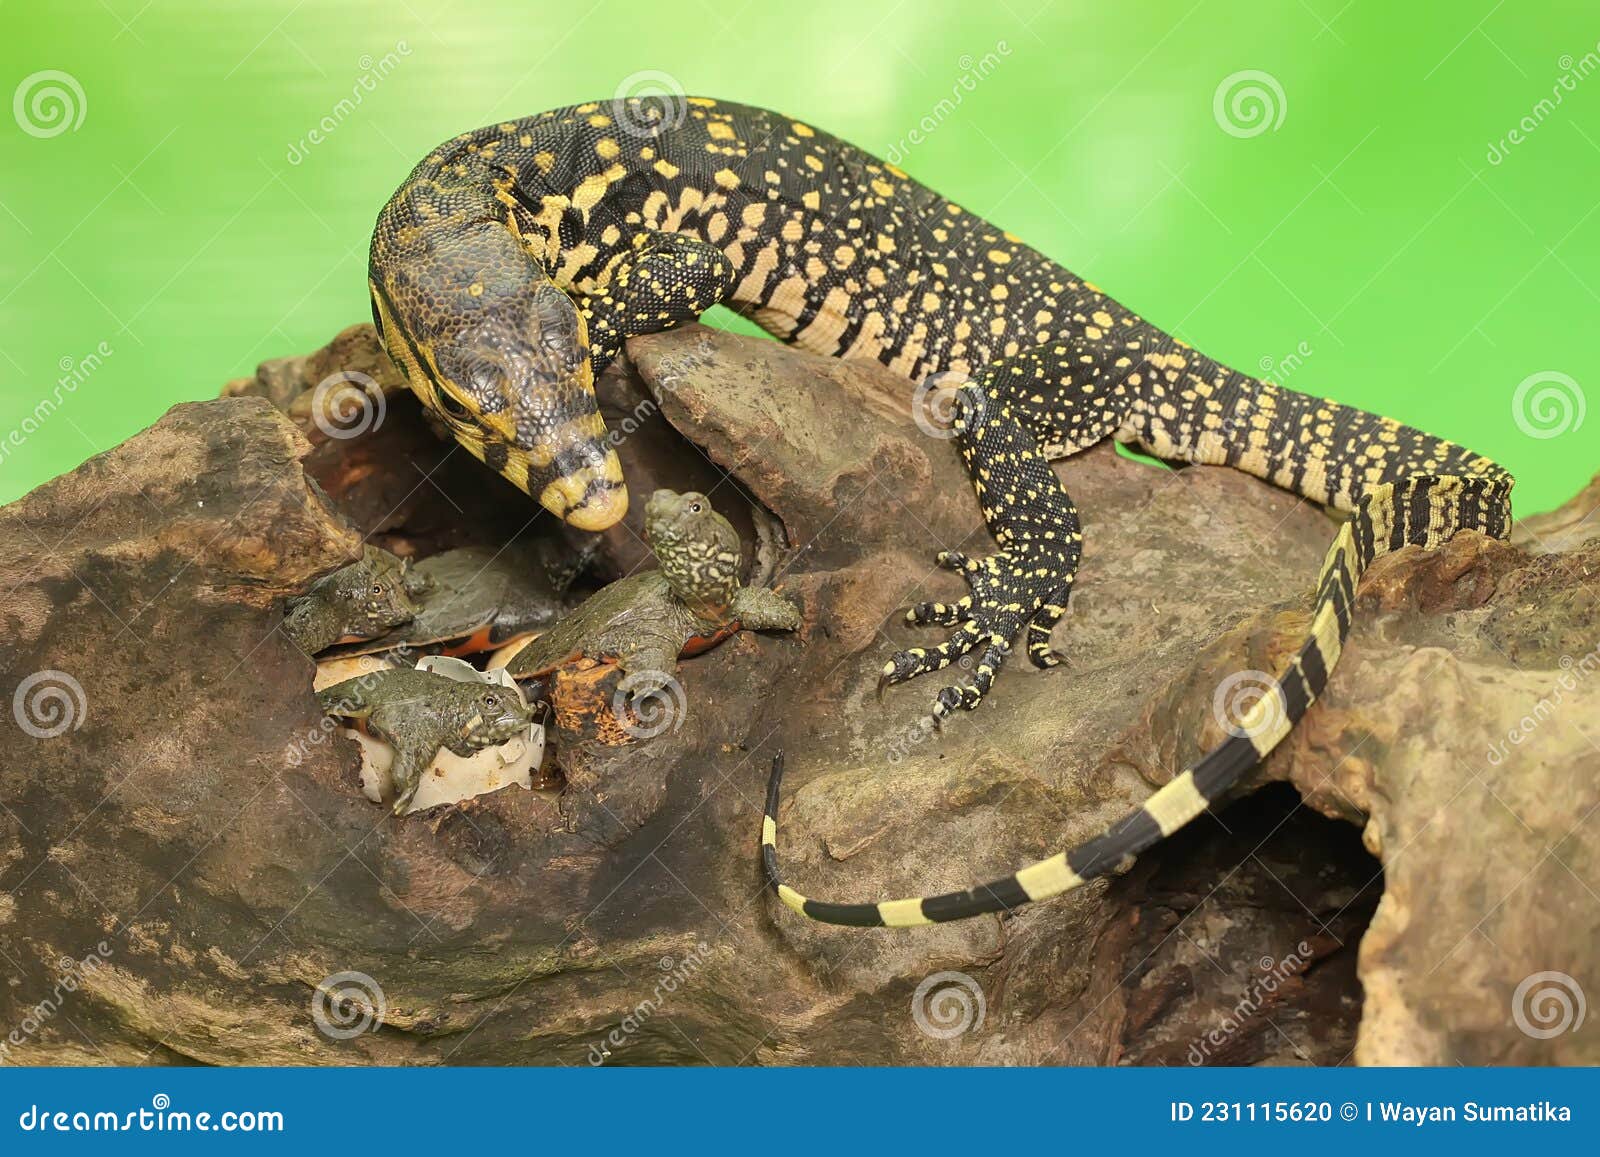 a young salvator monitor lizard is ready to prey on the turtles that have just hatched from their eggs.